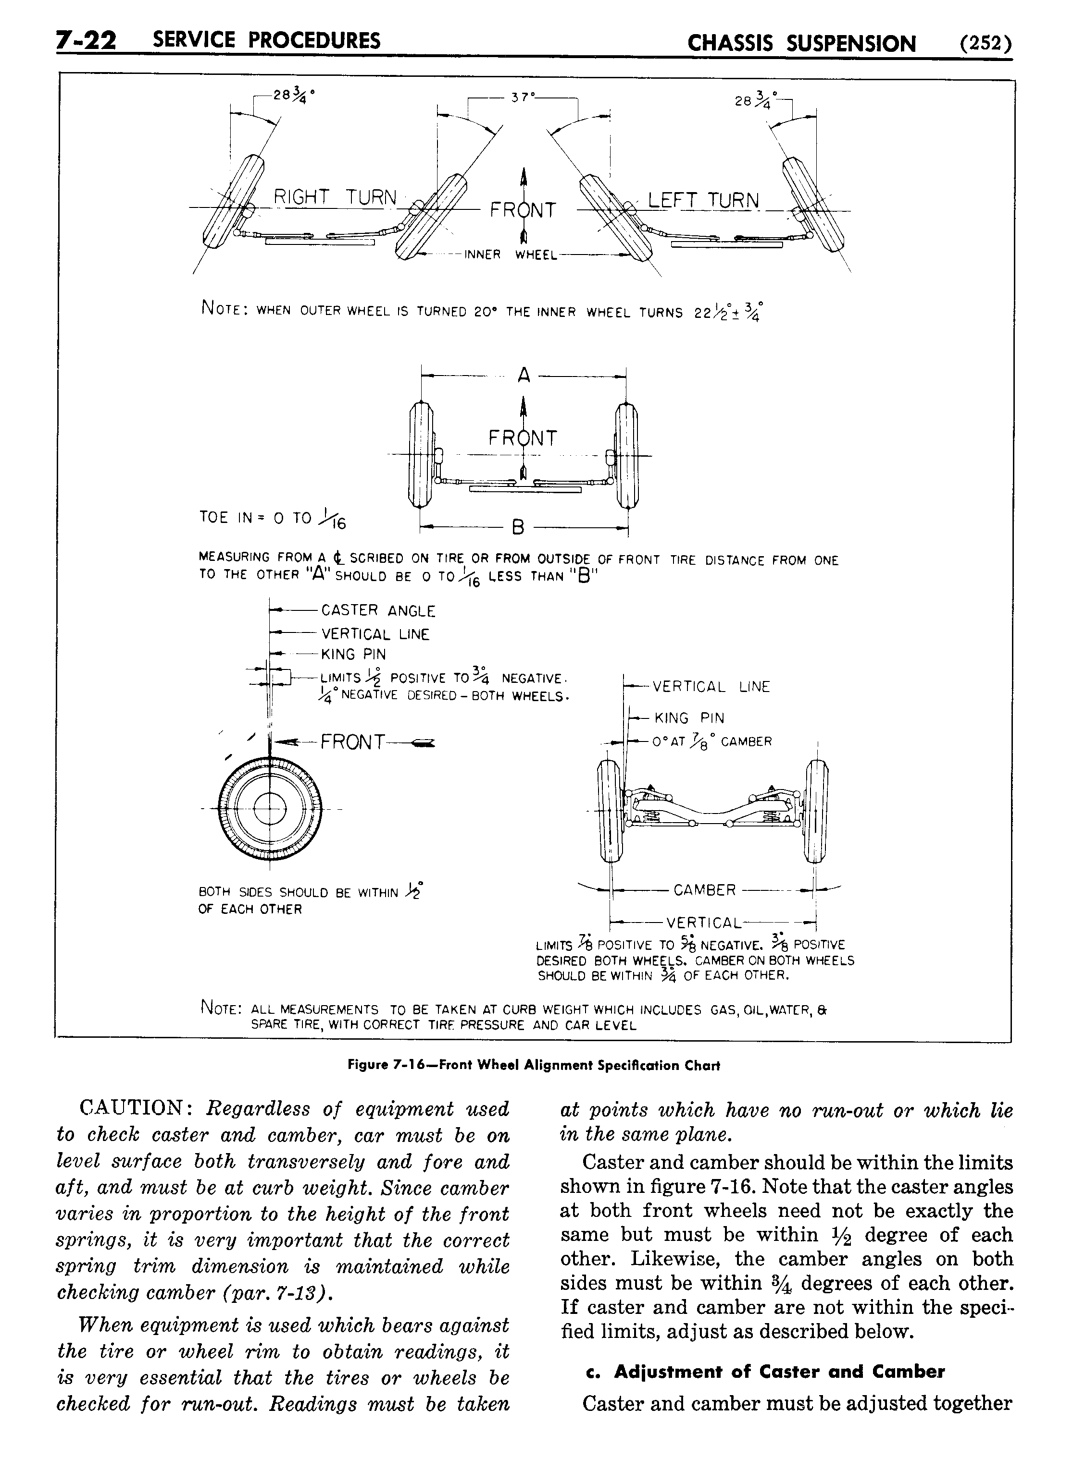 n_08 1954 Buick Shop Manual - Chassis Suspension-022-022.jpg